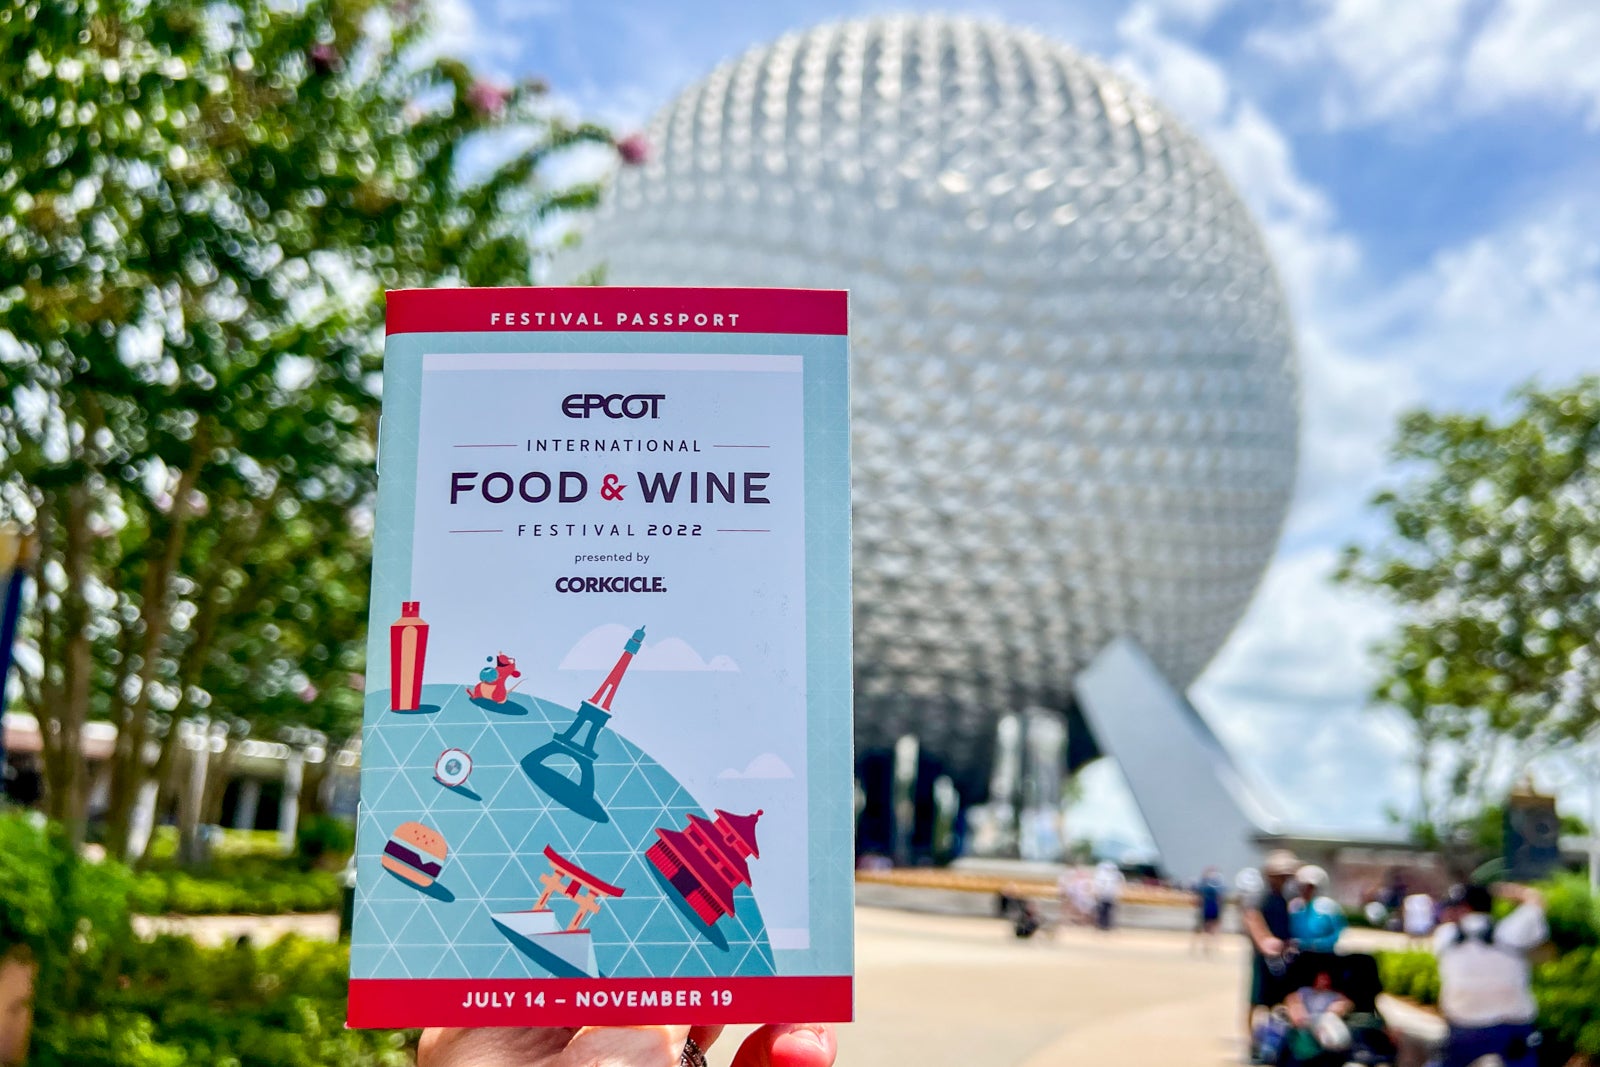 Epcot Food and Wine Festival badge in front of the Epcot entrance